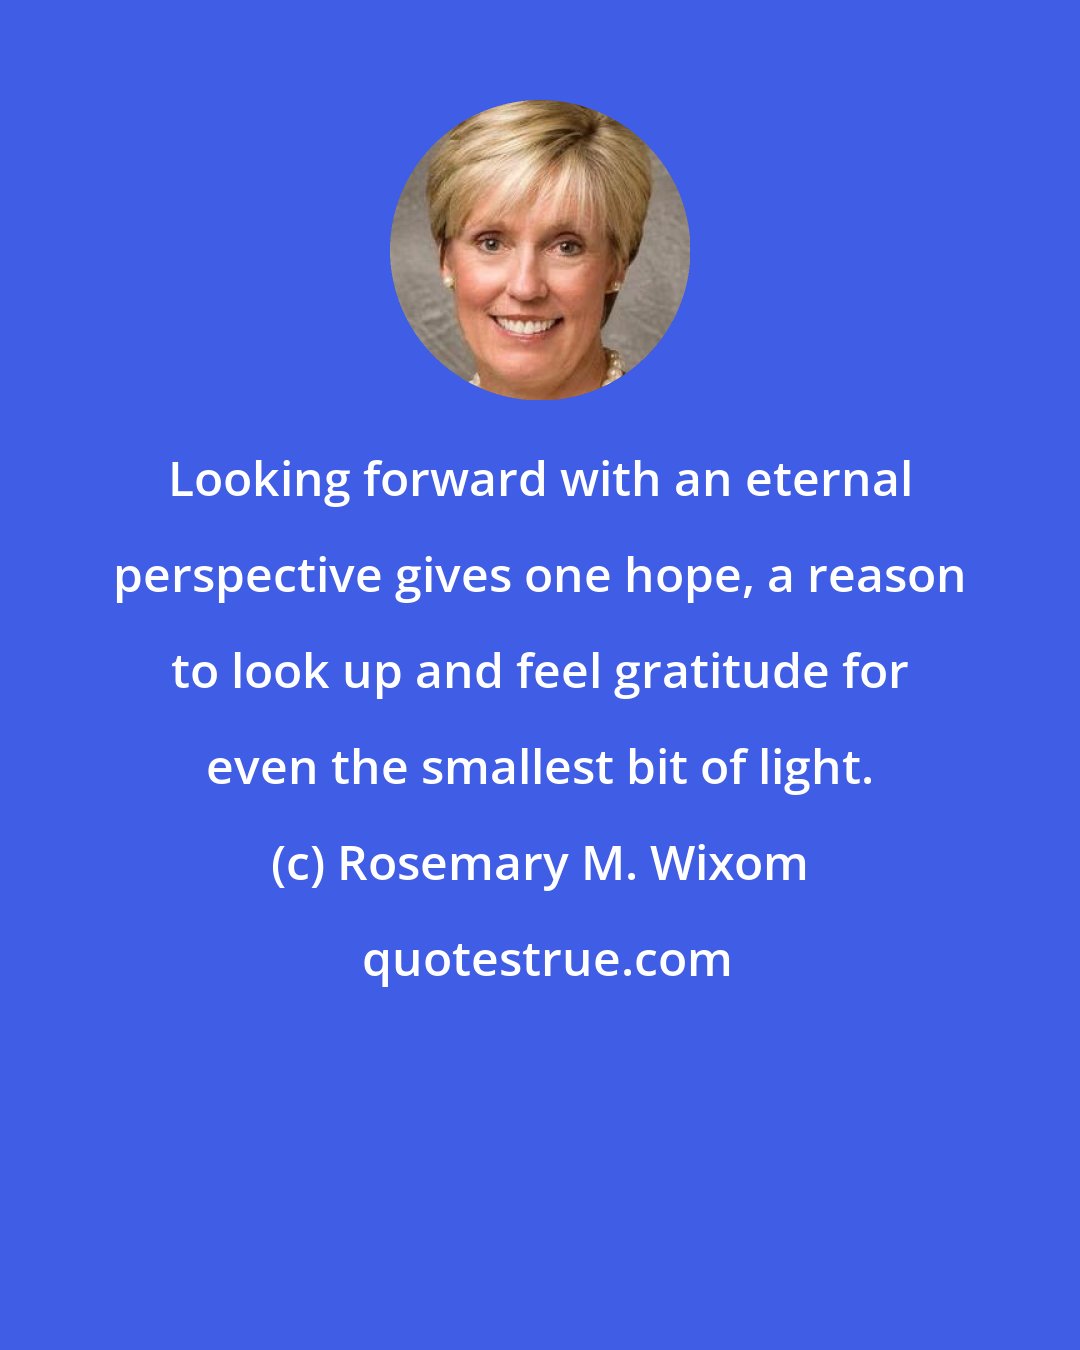 Rosemary M. Wixom: Looking forward with an eternal perspective gives one hope, a reason to look up and feel gratitude for even the smallest bit of light.